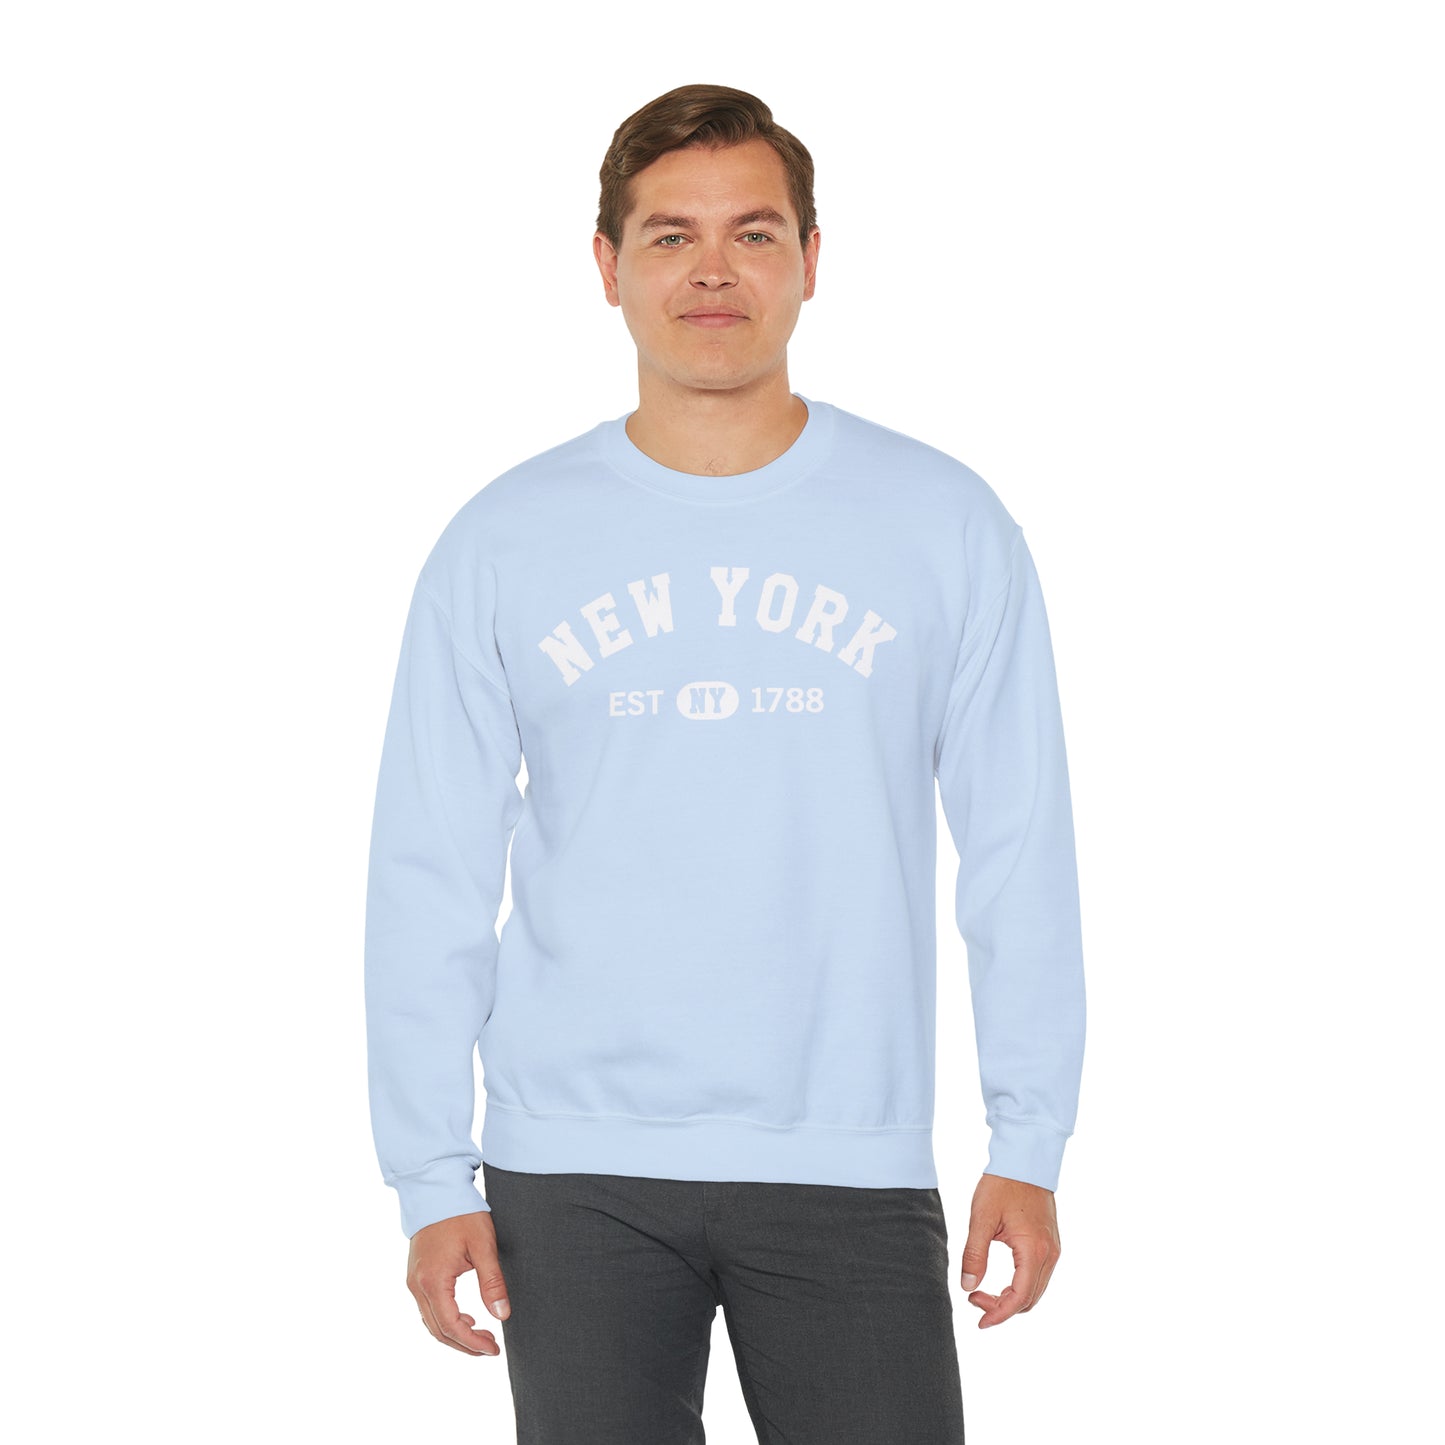 NY New York State Sweatshirt, I Love NY Vintage Graphic USA American Crewneck Sports Sweater Jumper Pullover Men Women Top